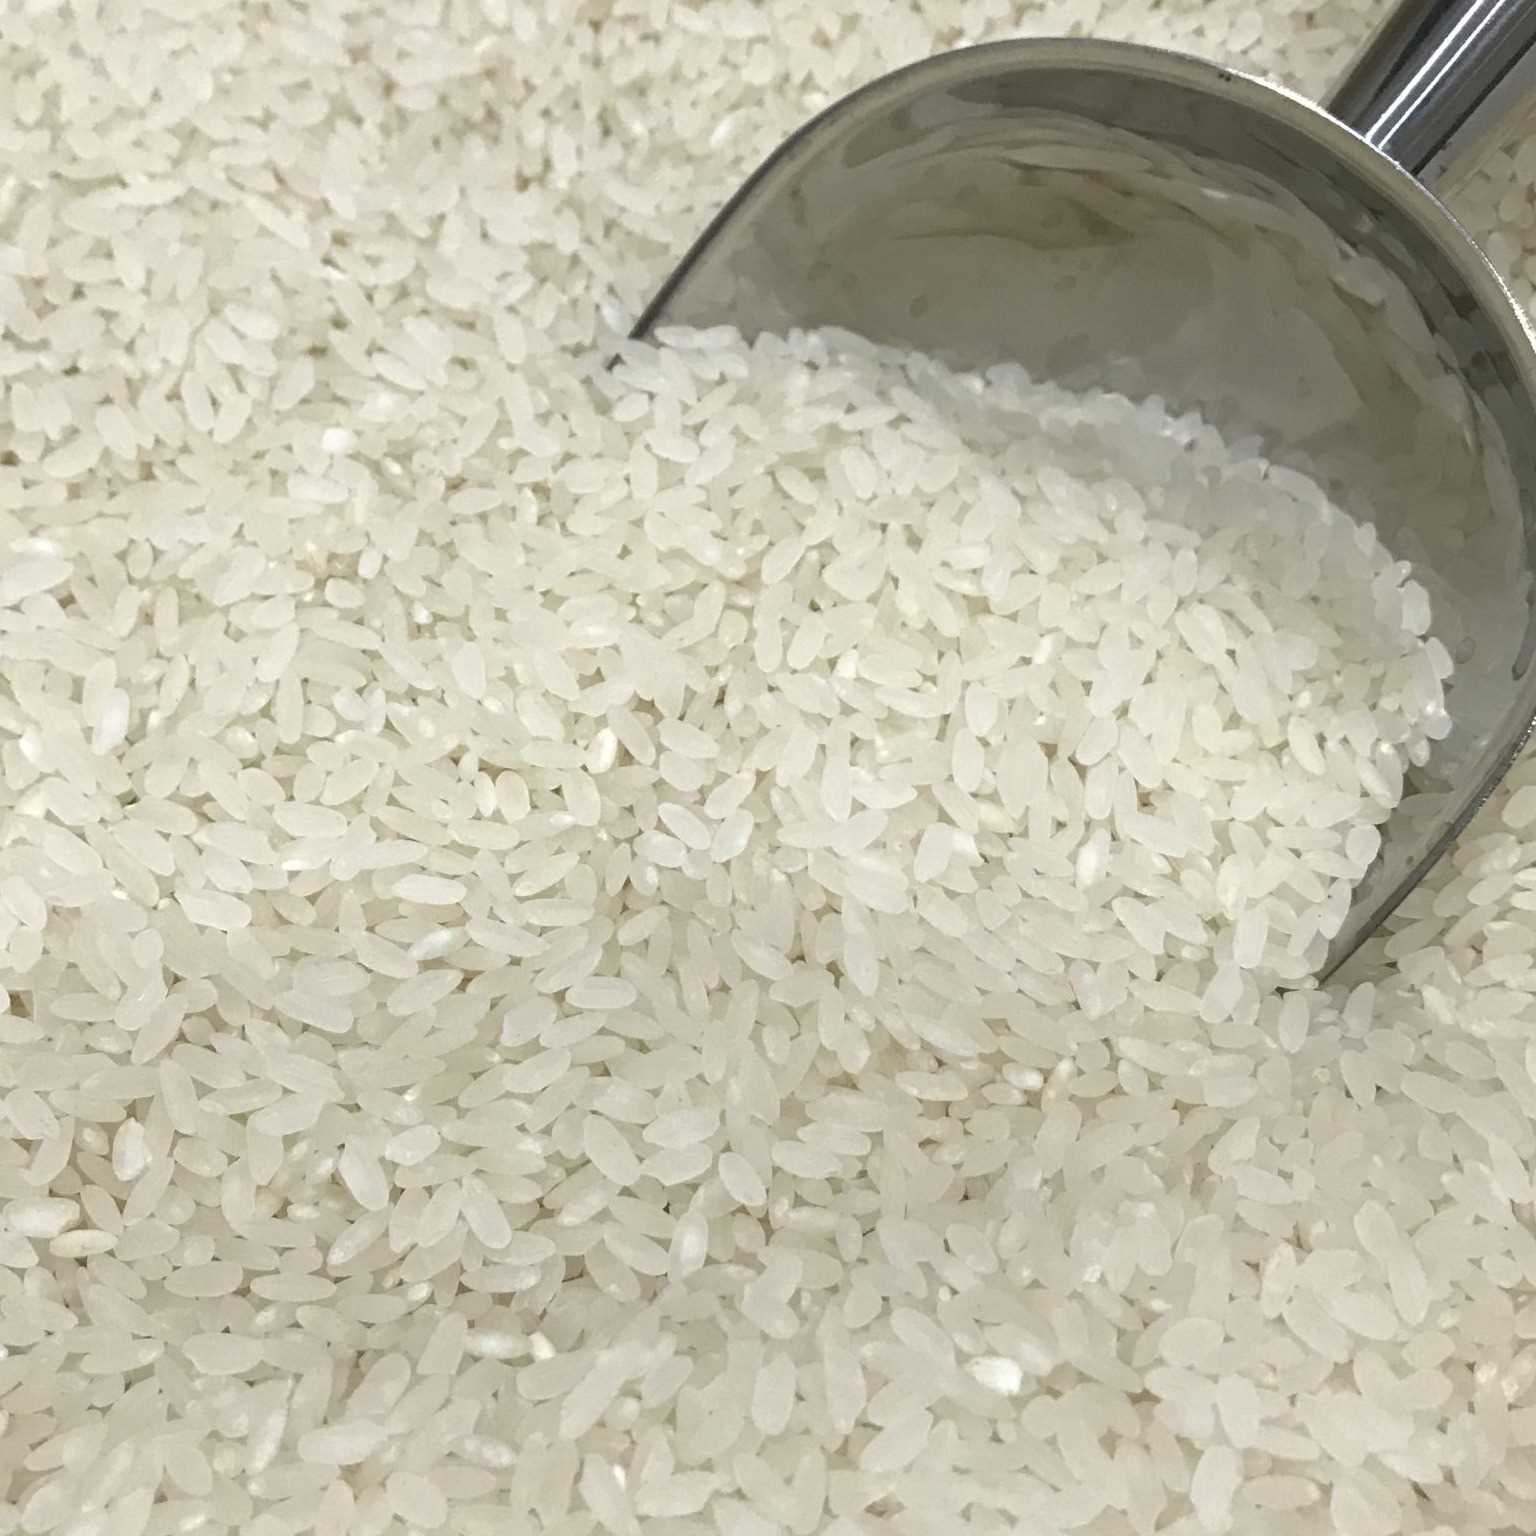 i'm looking for rice suppliers